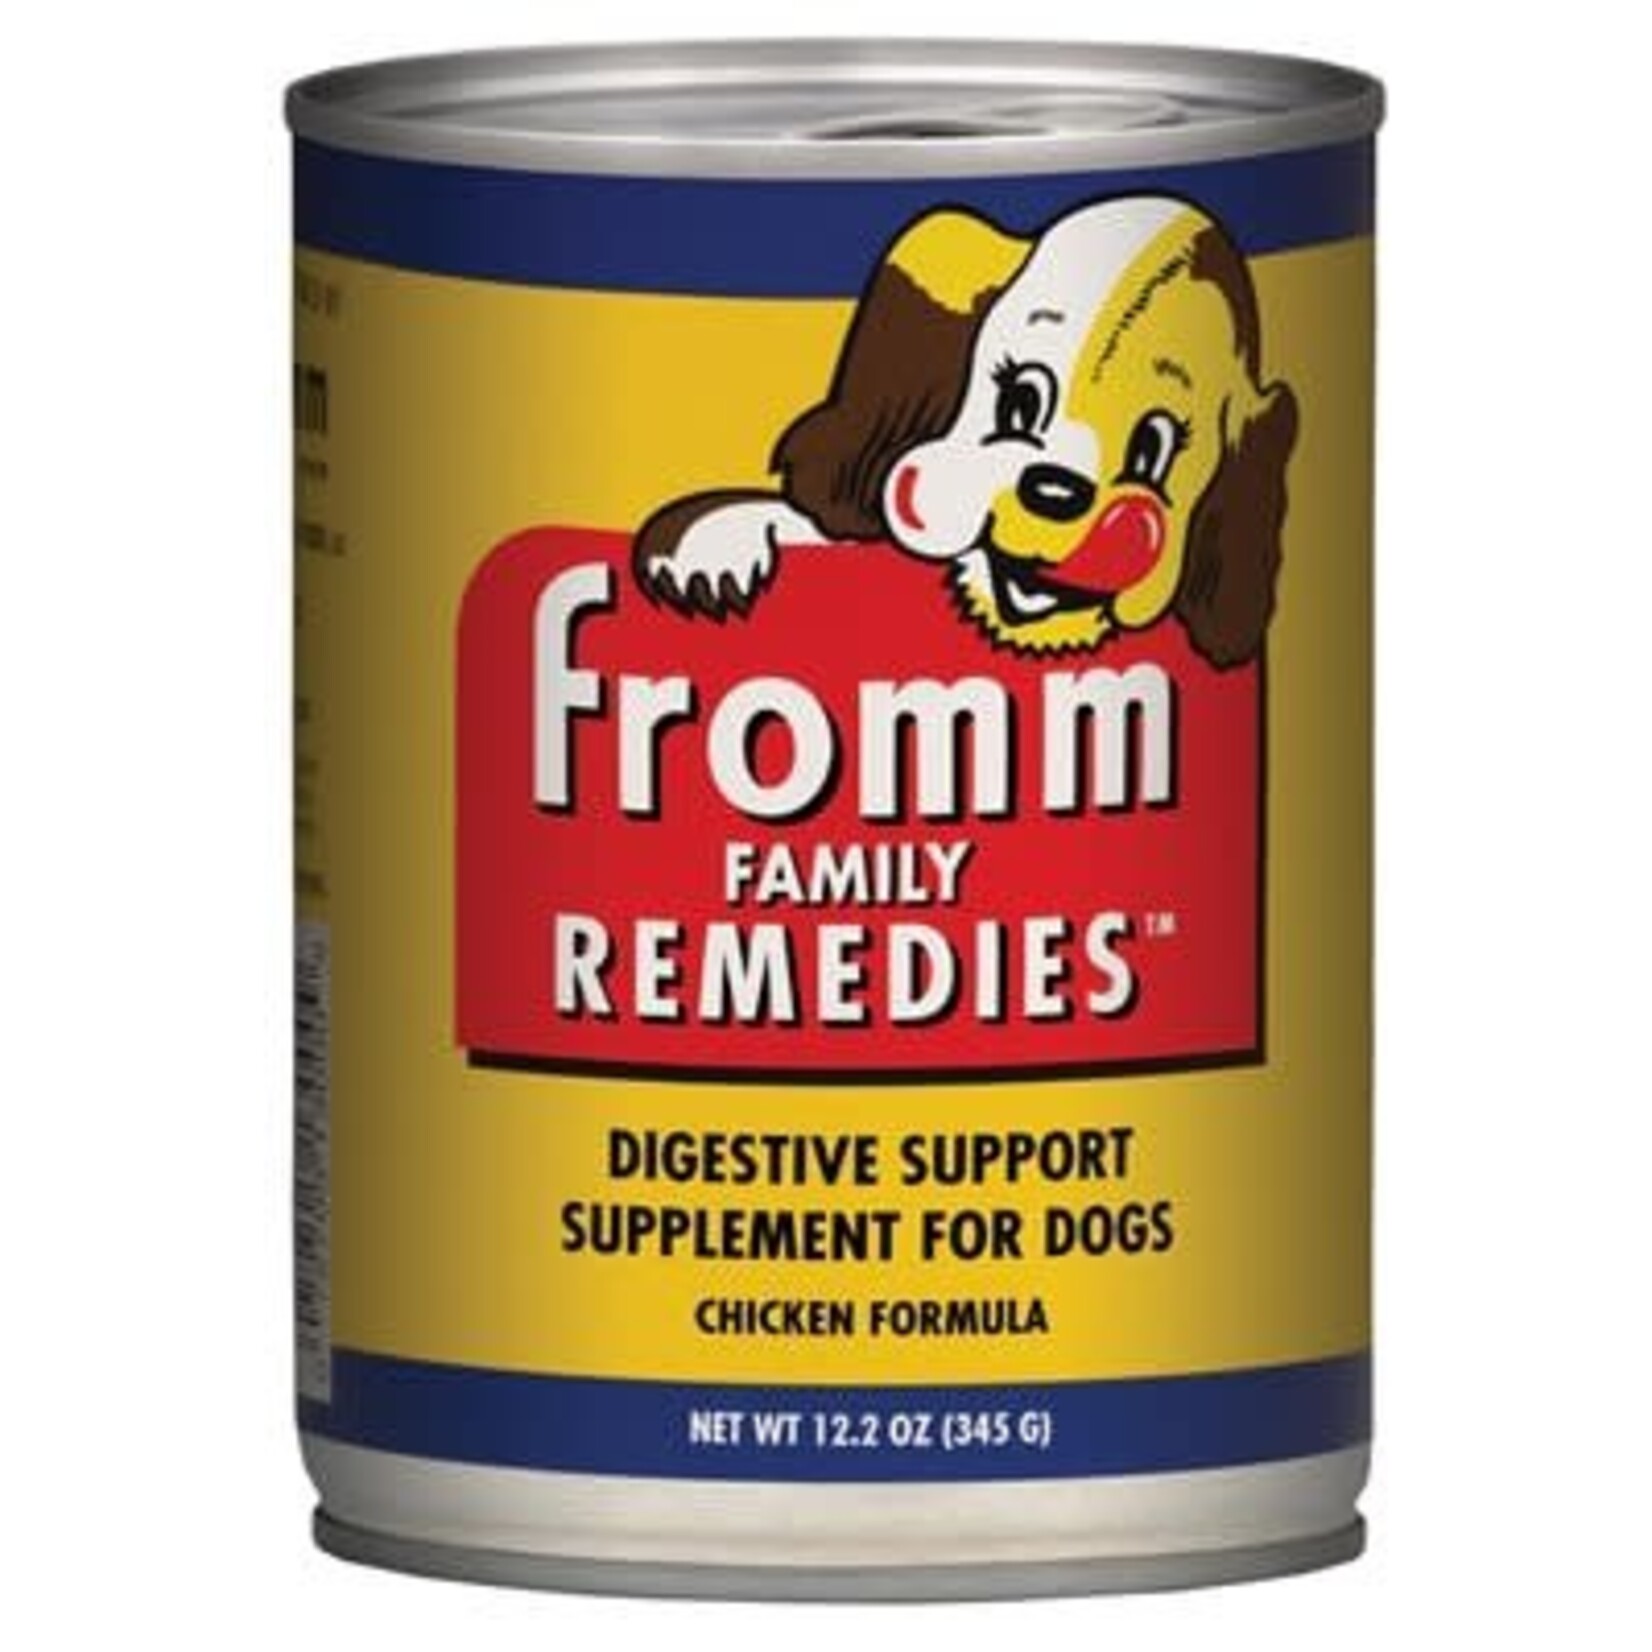 FROMM FROMM NOURRITURE HUMIDE CHIEN REMEDIES POULET 12 OZ